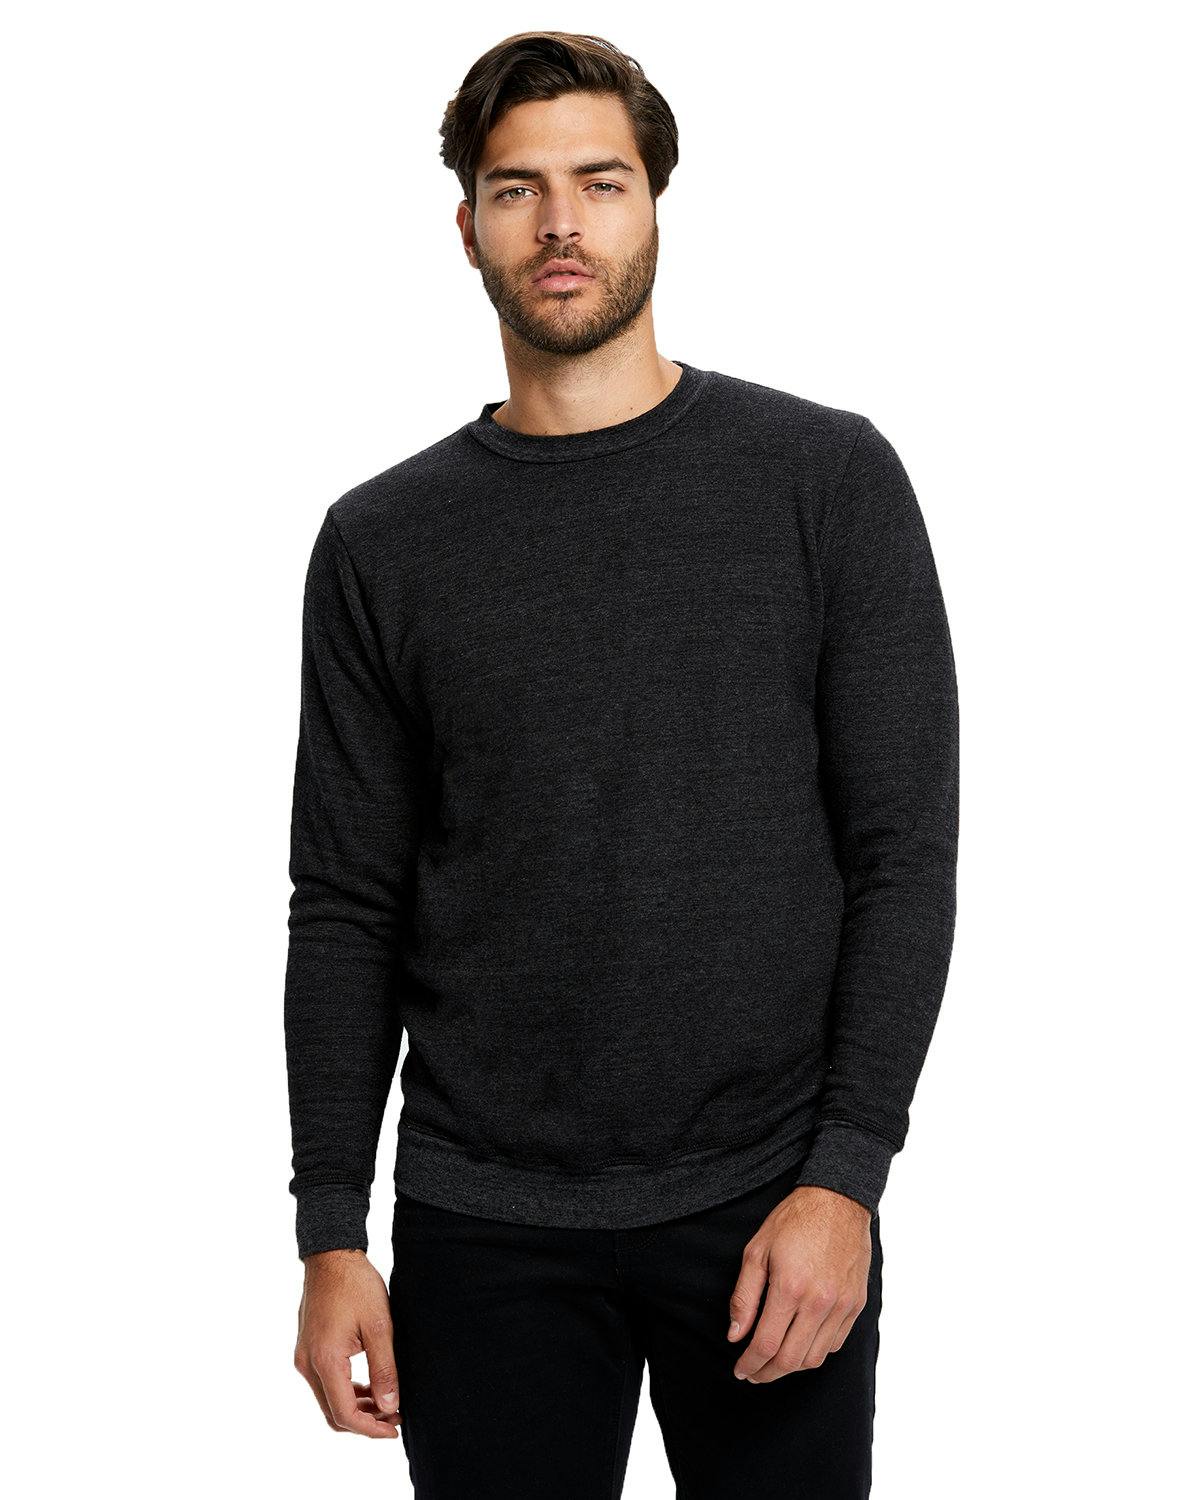 Image for Unisex 6.5 oz. Heavyweight Loop Terry Triblend Long-Sleeve Crew